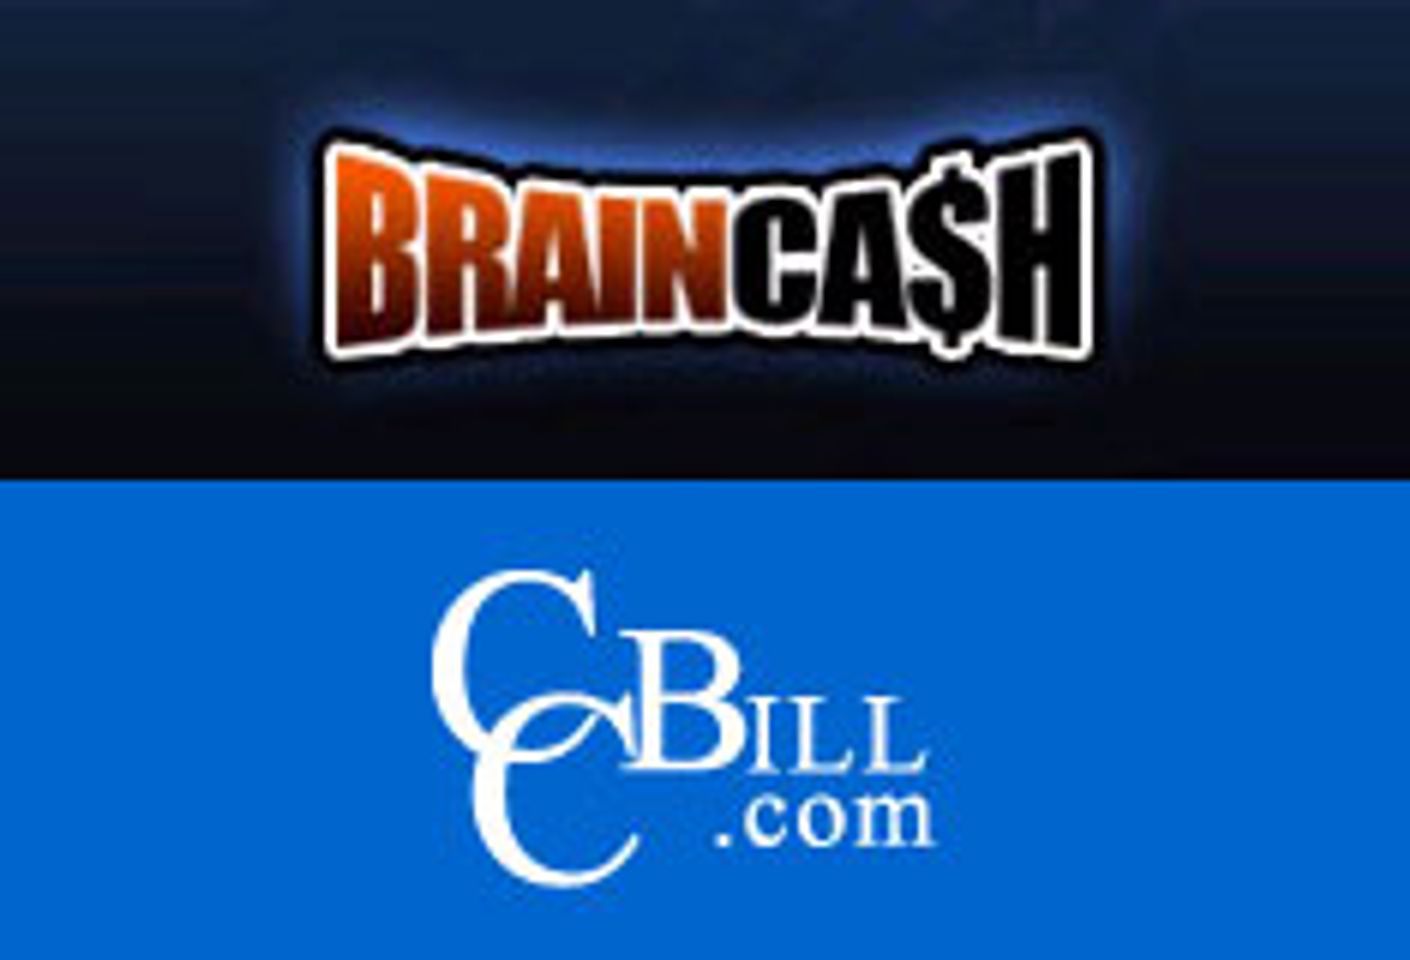 BrainCash and CCBill Announce Webmaster Access Party